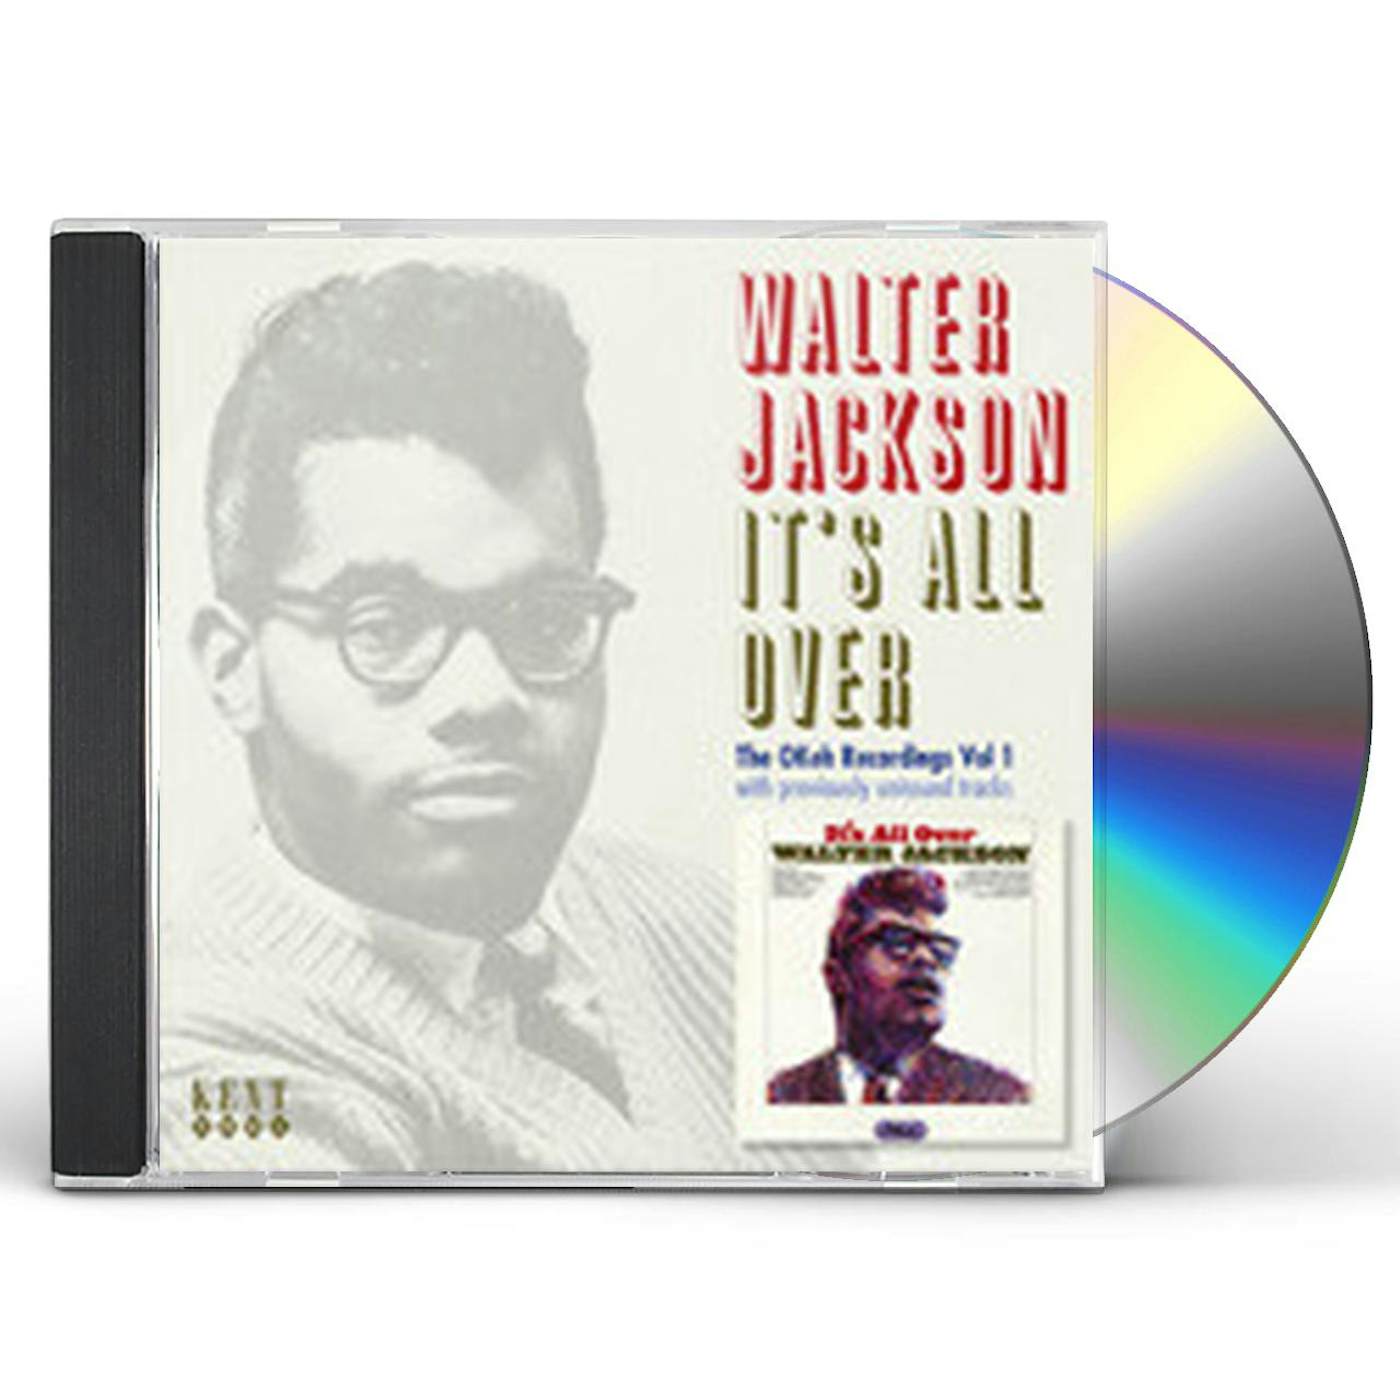 Walter Jackson IT'S ALL OVER: THE OKEY RECORDINGS VOL.1 CD